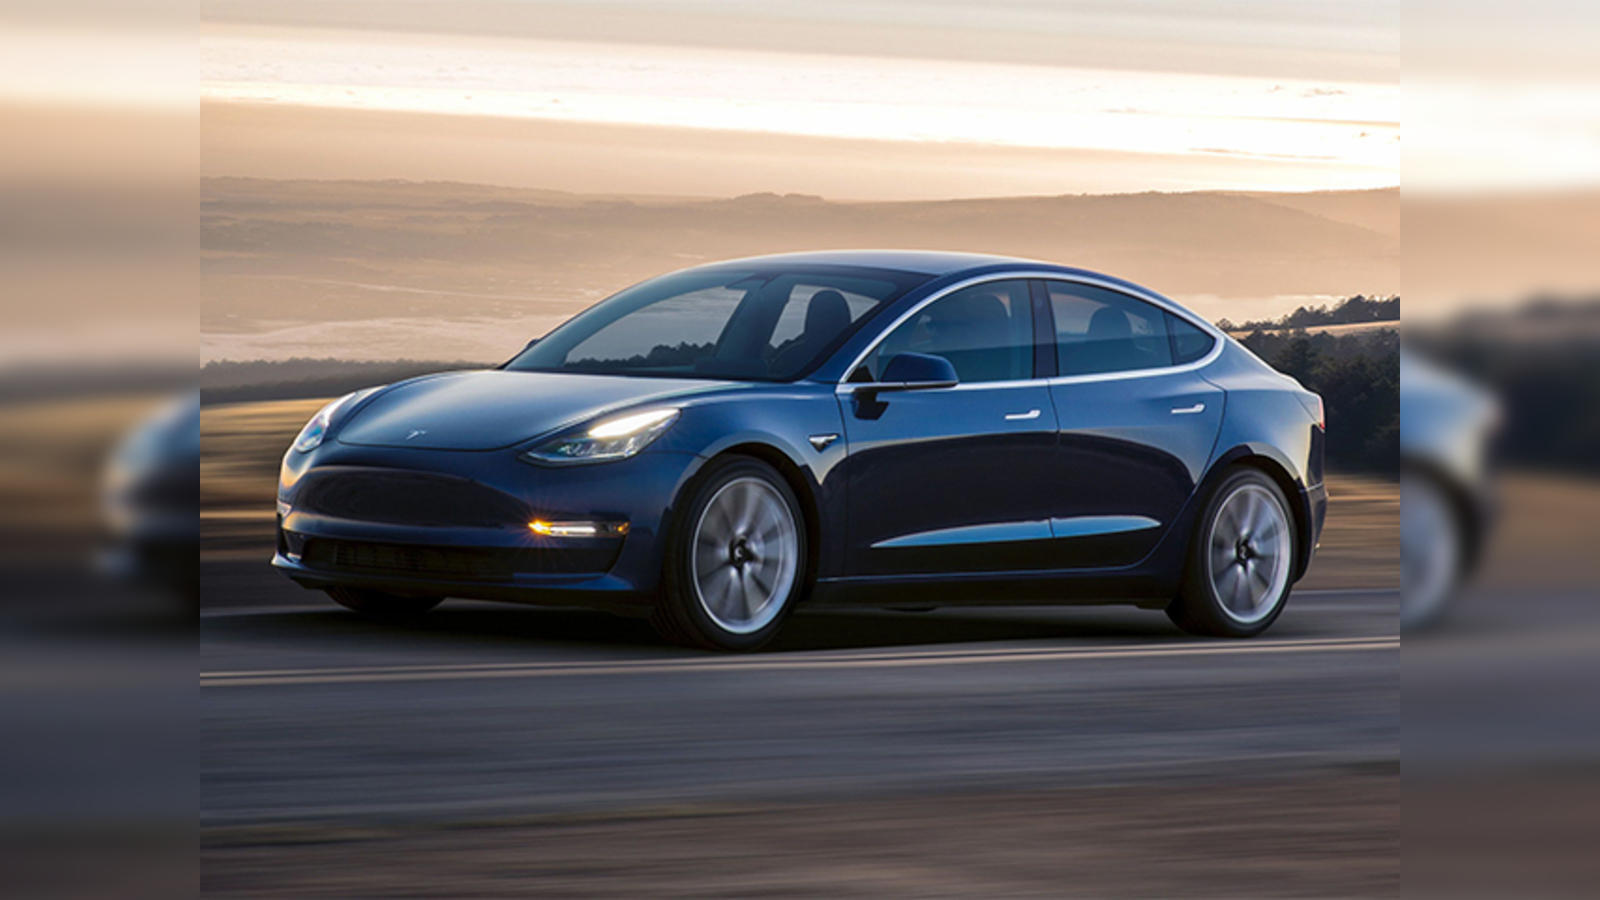 Tesla Writes the Luxury Vehicle Story in Q2 2019 Kelley Blue Book Brand  Watch - Cox Automotive Inc.